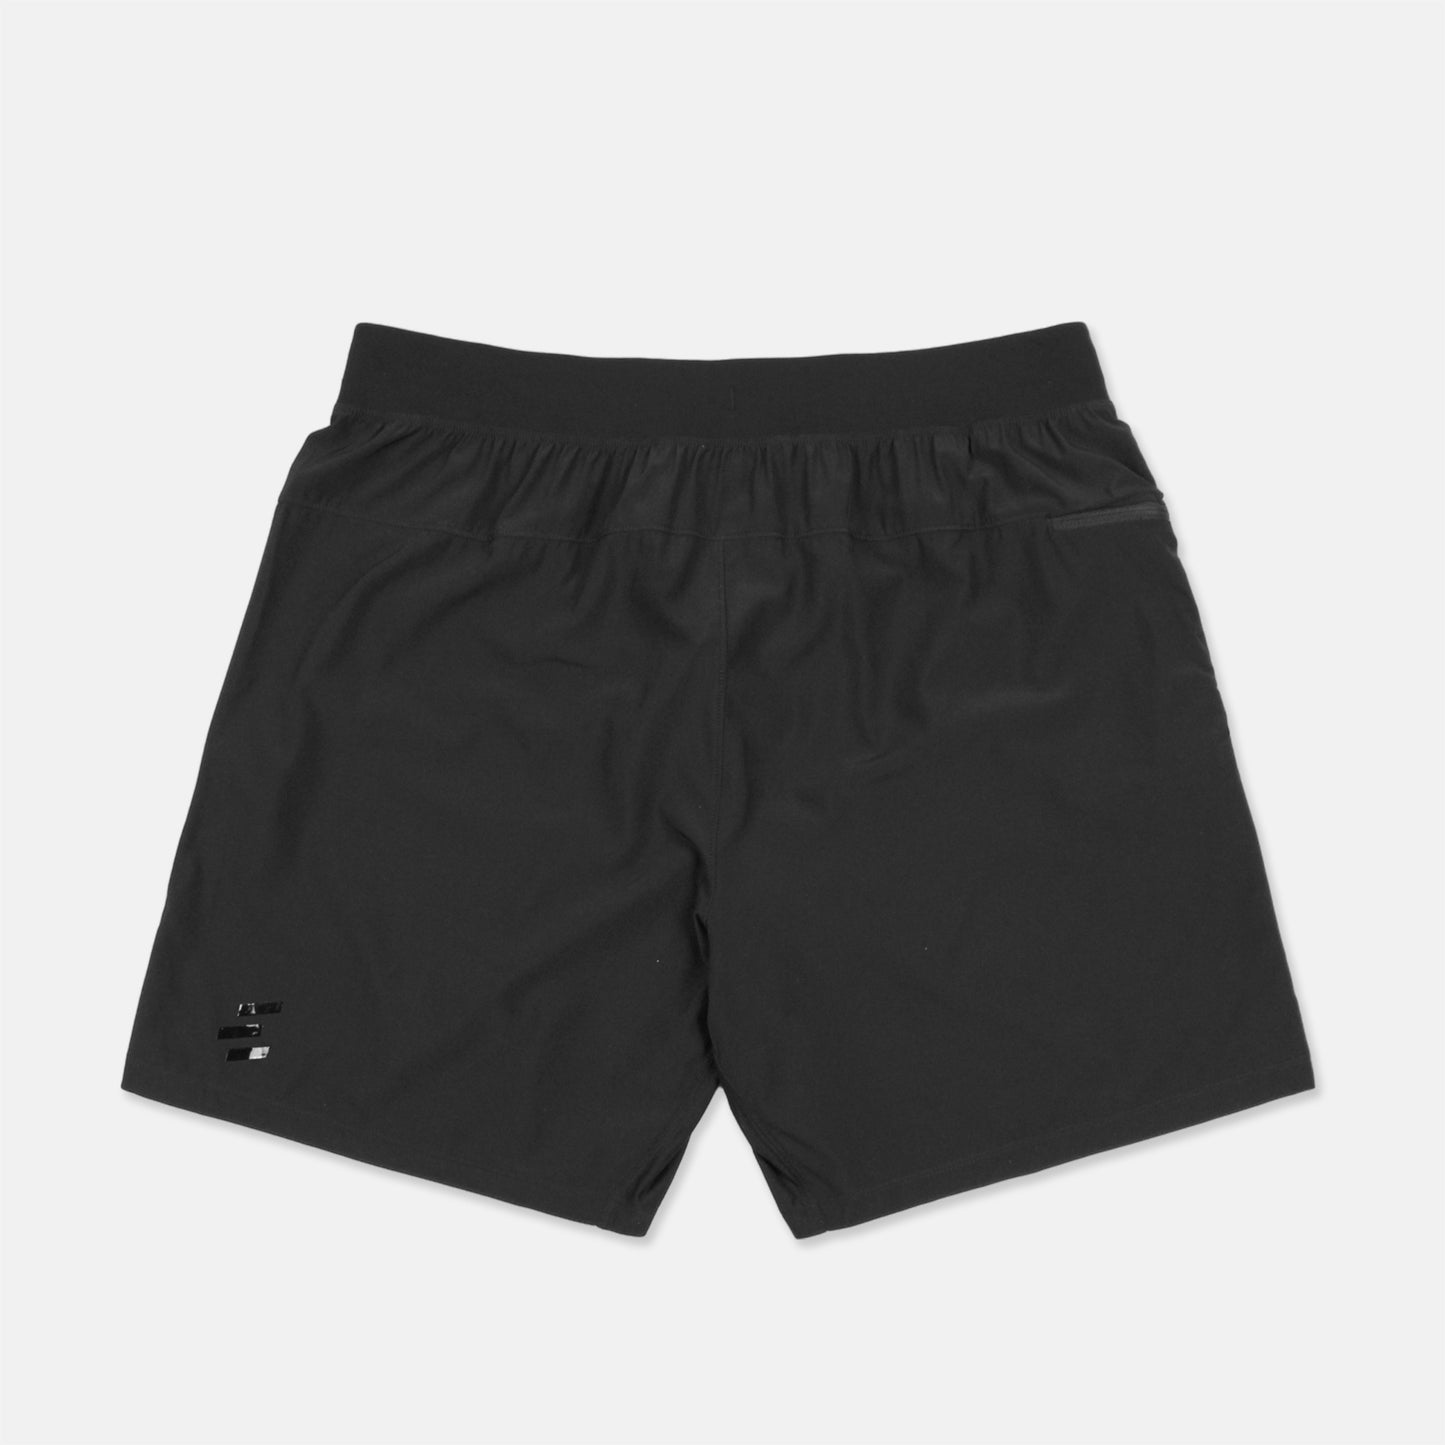 THE ACTIVE SHORTS